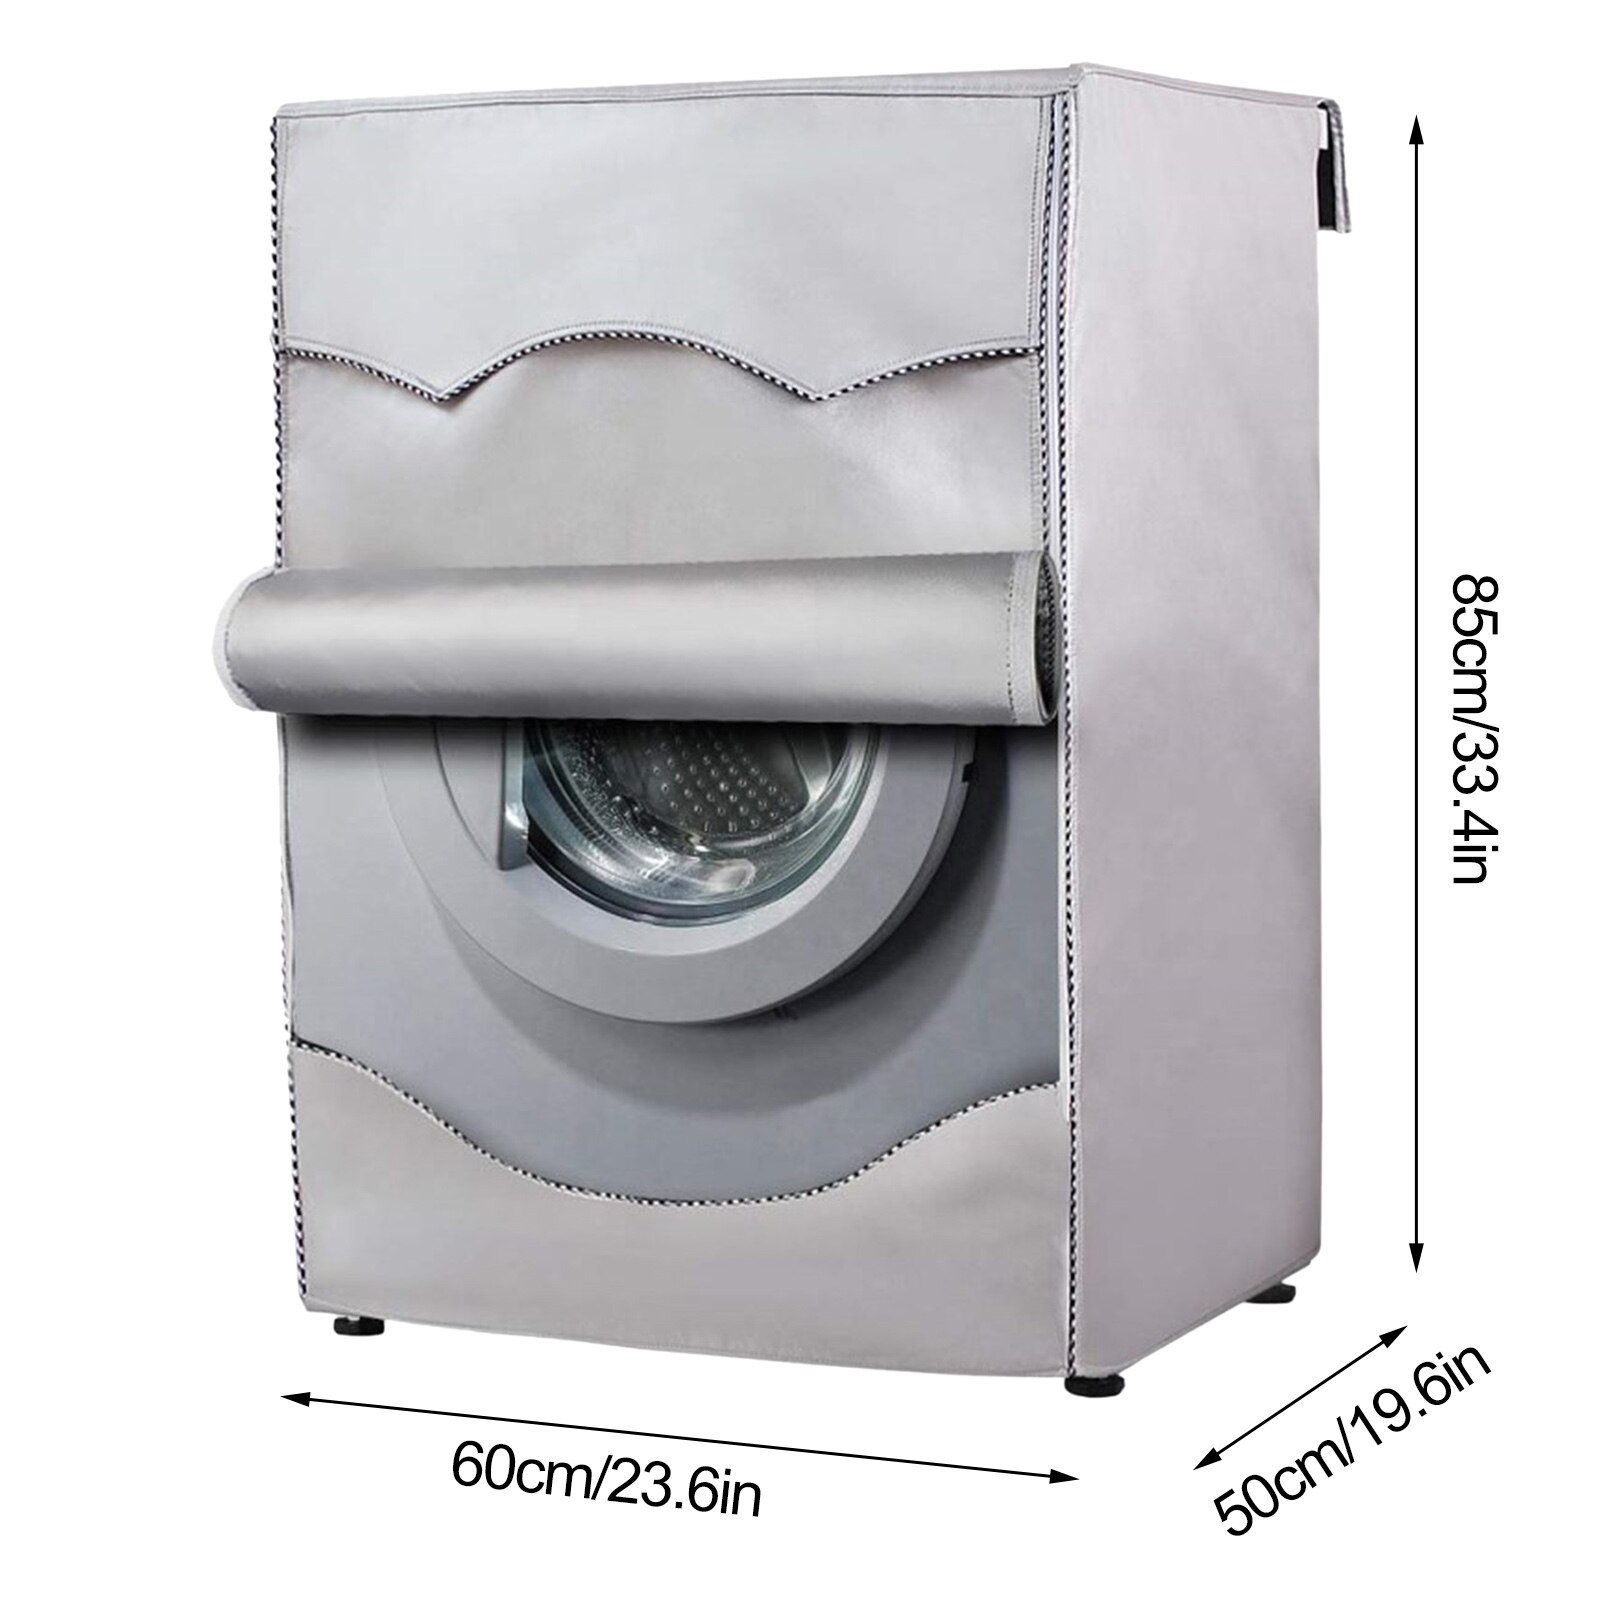 Washing Machine Cover Sun Protection Most Waterproof Fits Fabric 420d Fisher Or Oxford Cover Top load